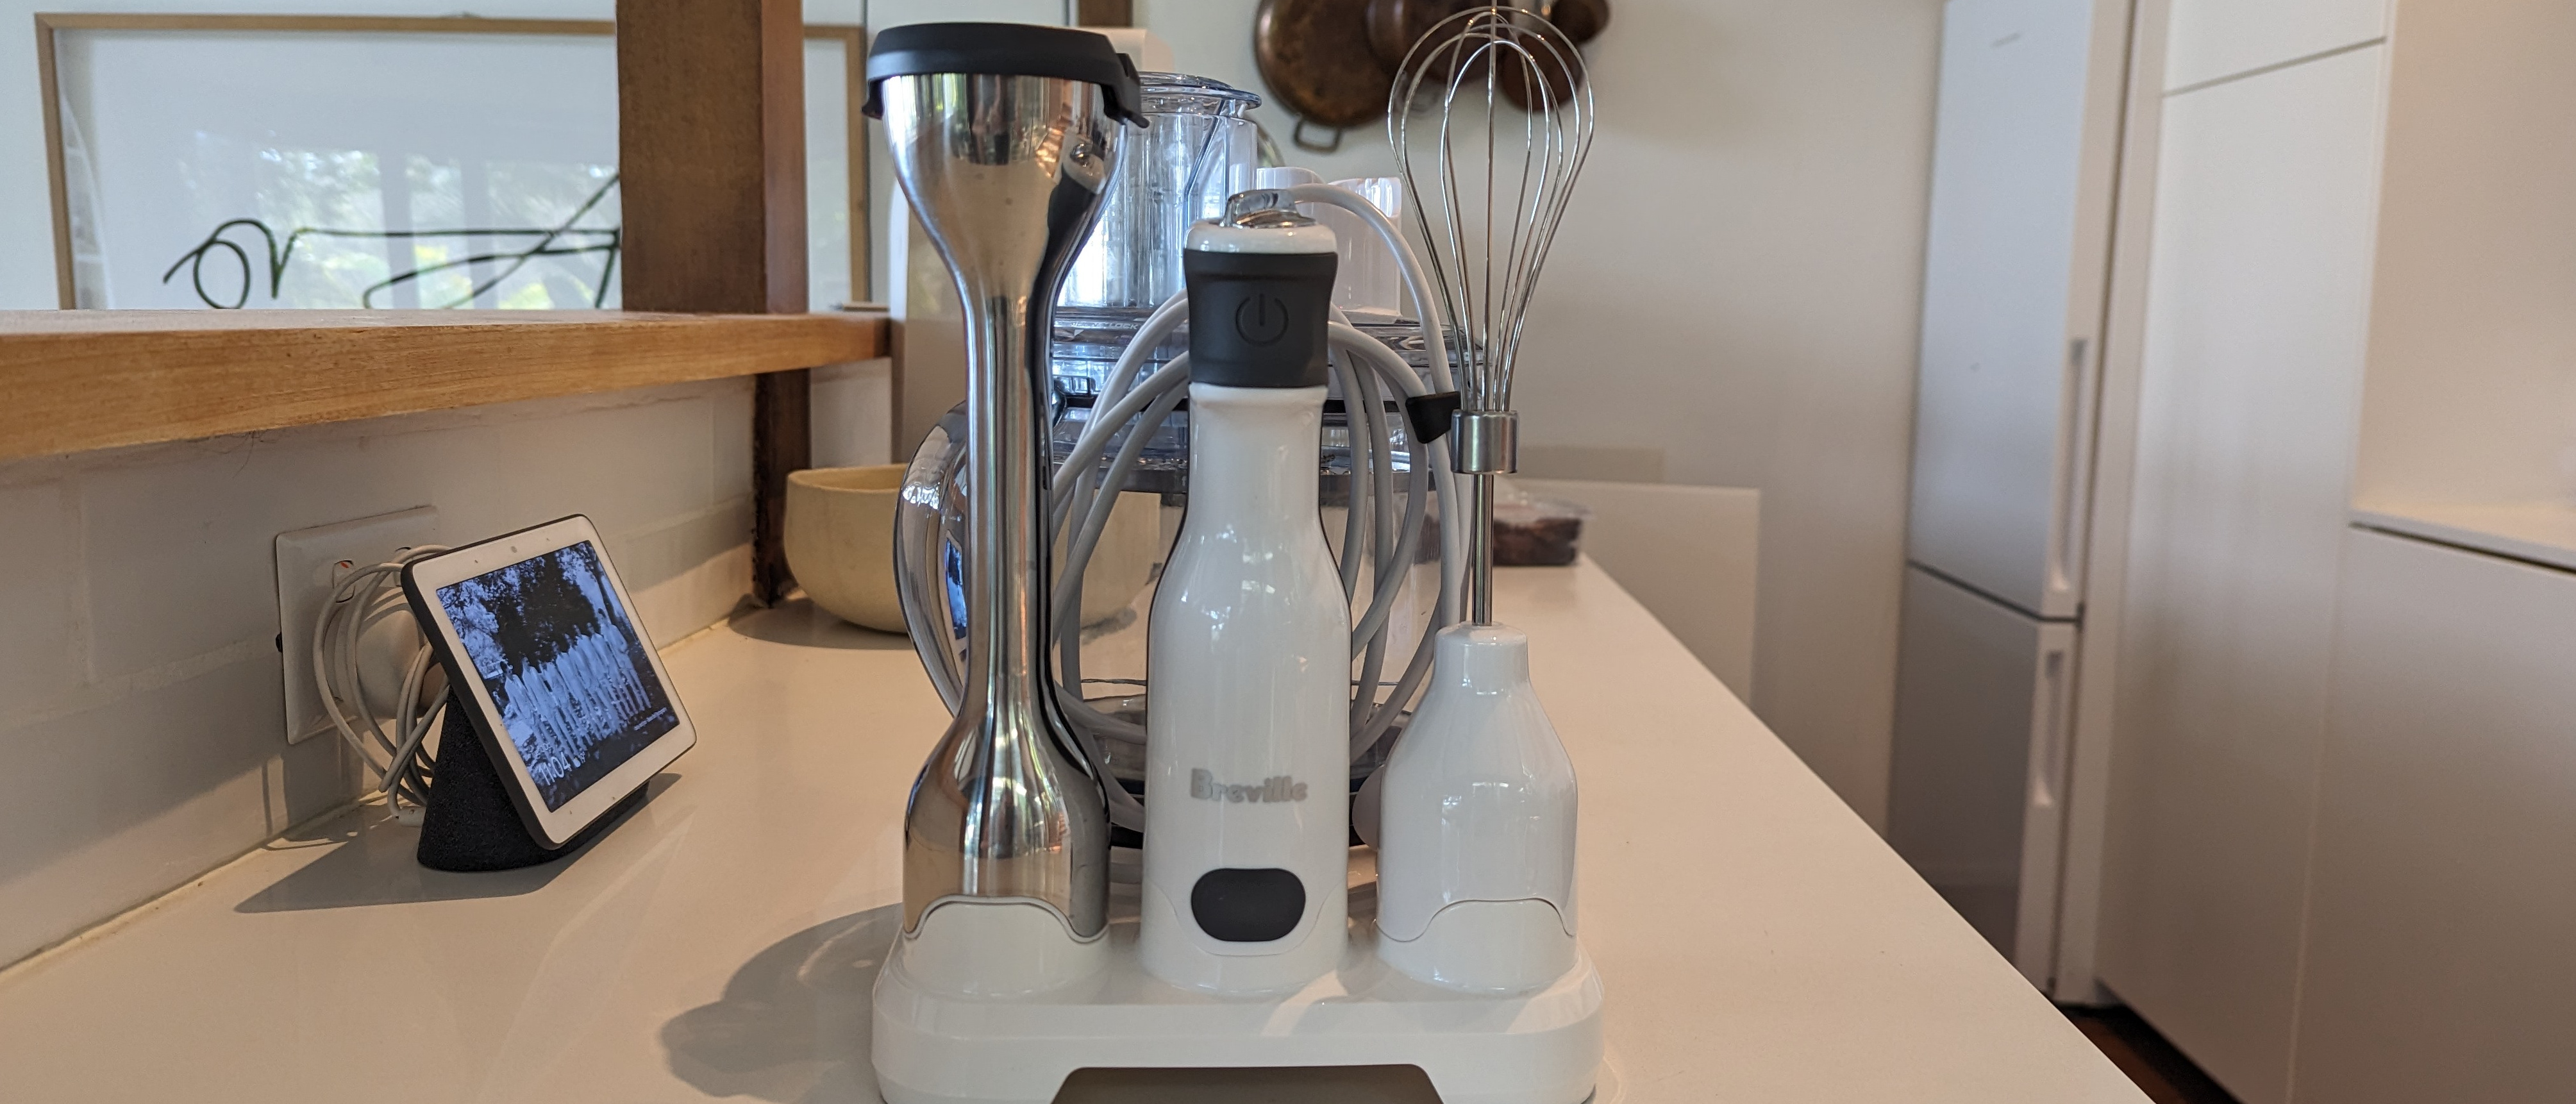 Breville Fresh & Furious Review